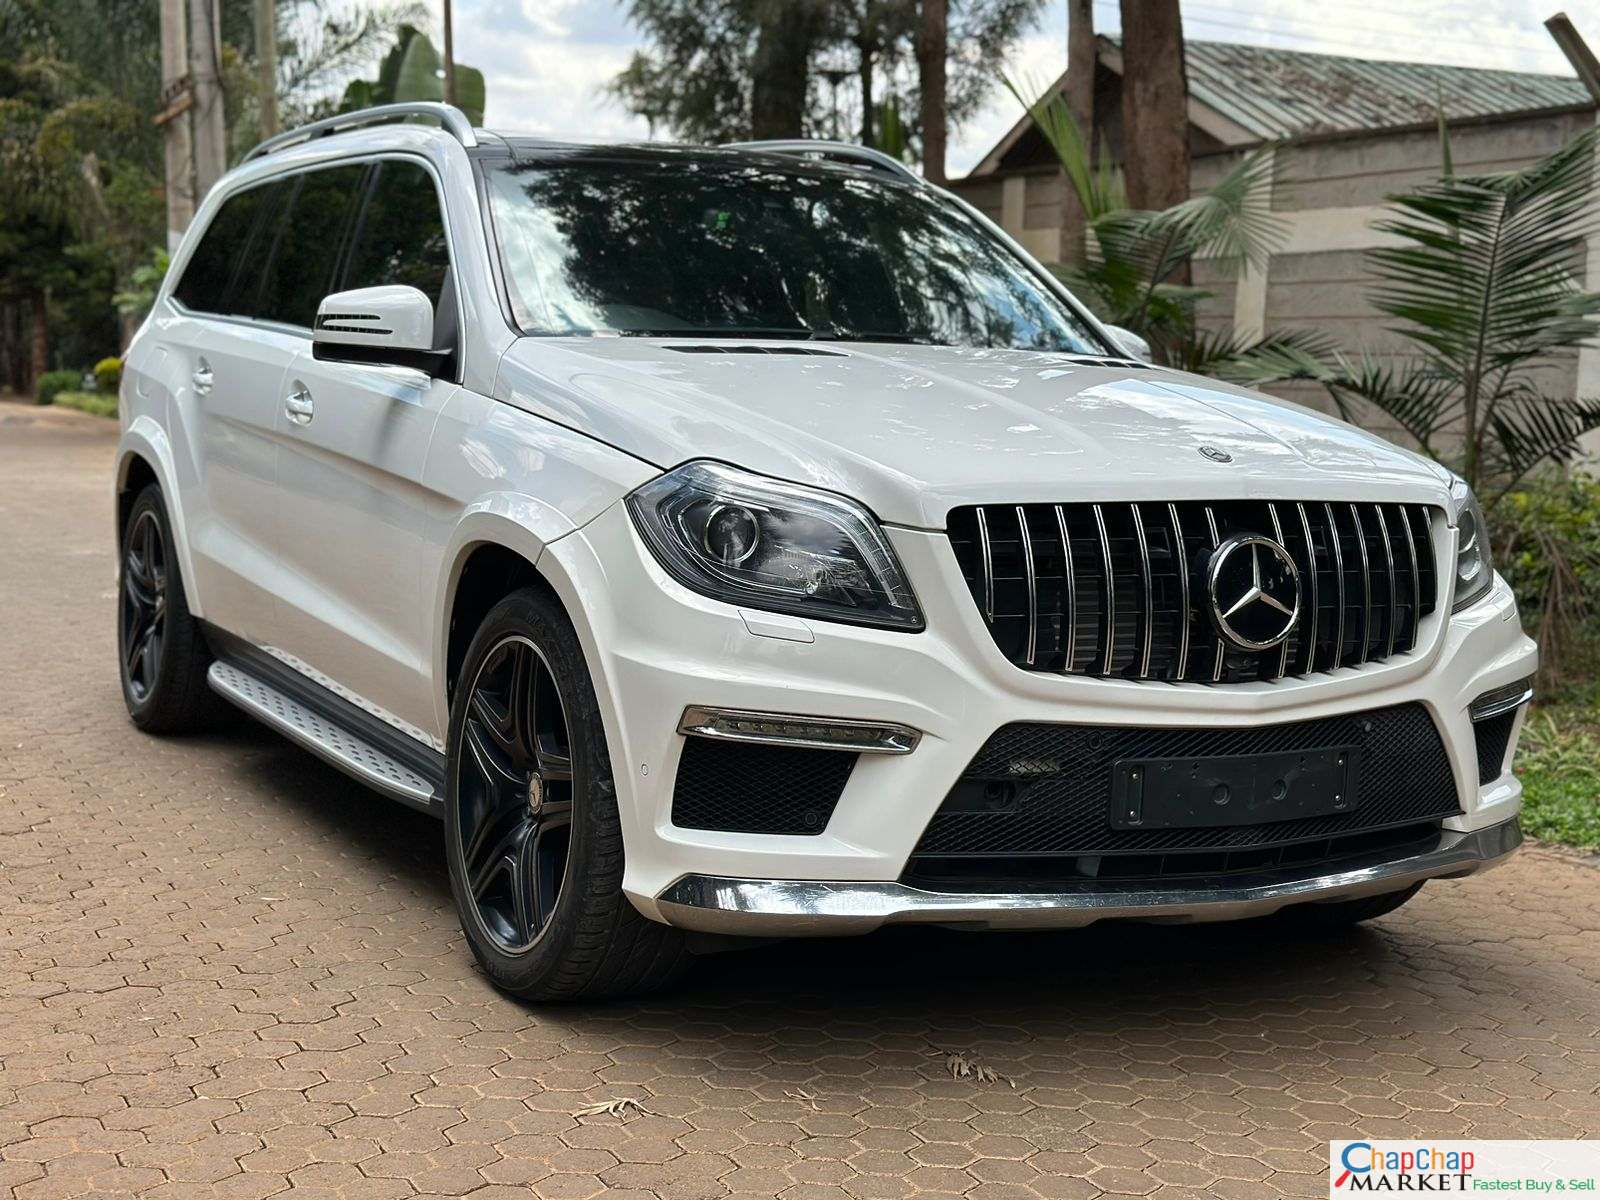 Mercedes Benz GLE 350d🔥 You Pay 30% DEPOSIT Mercedes GLE for sale in kenya hire purchase installments GLE kenya Trade in OK EXCLUSIVE